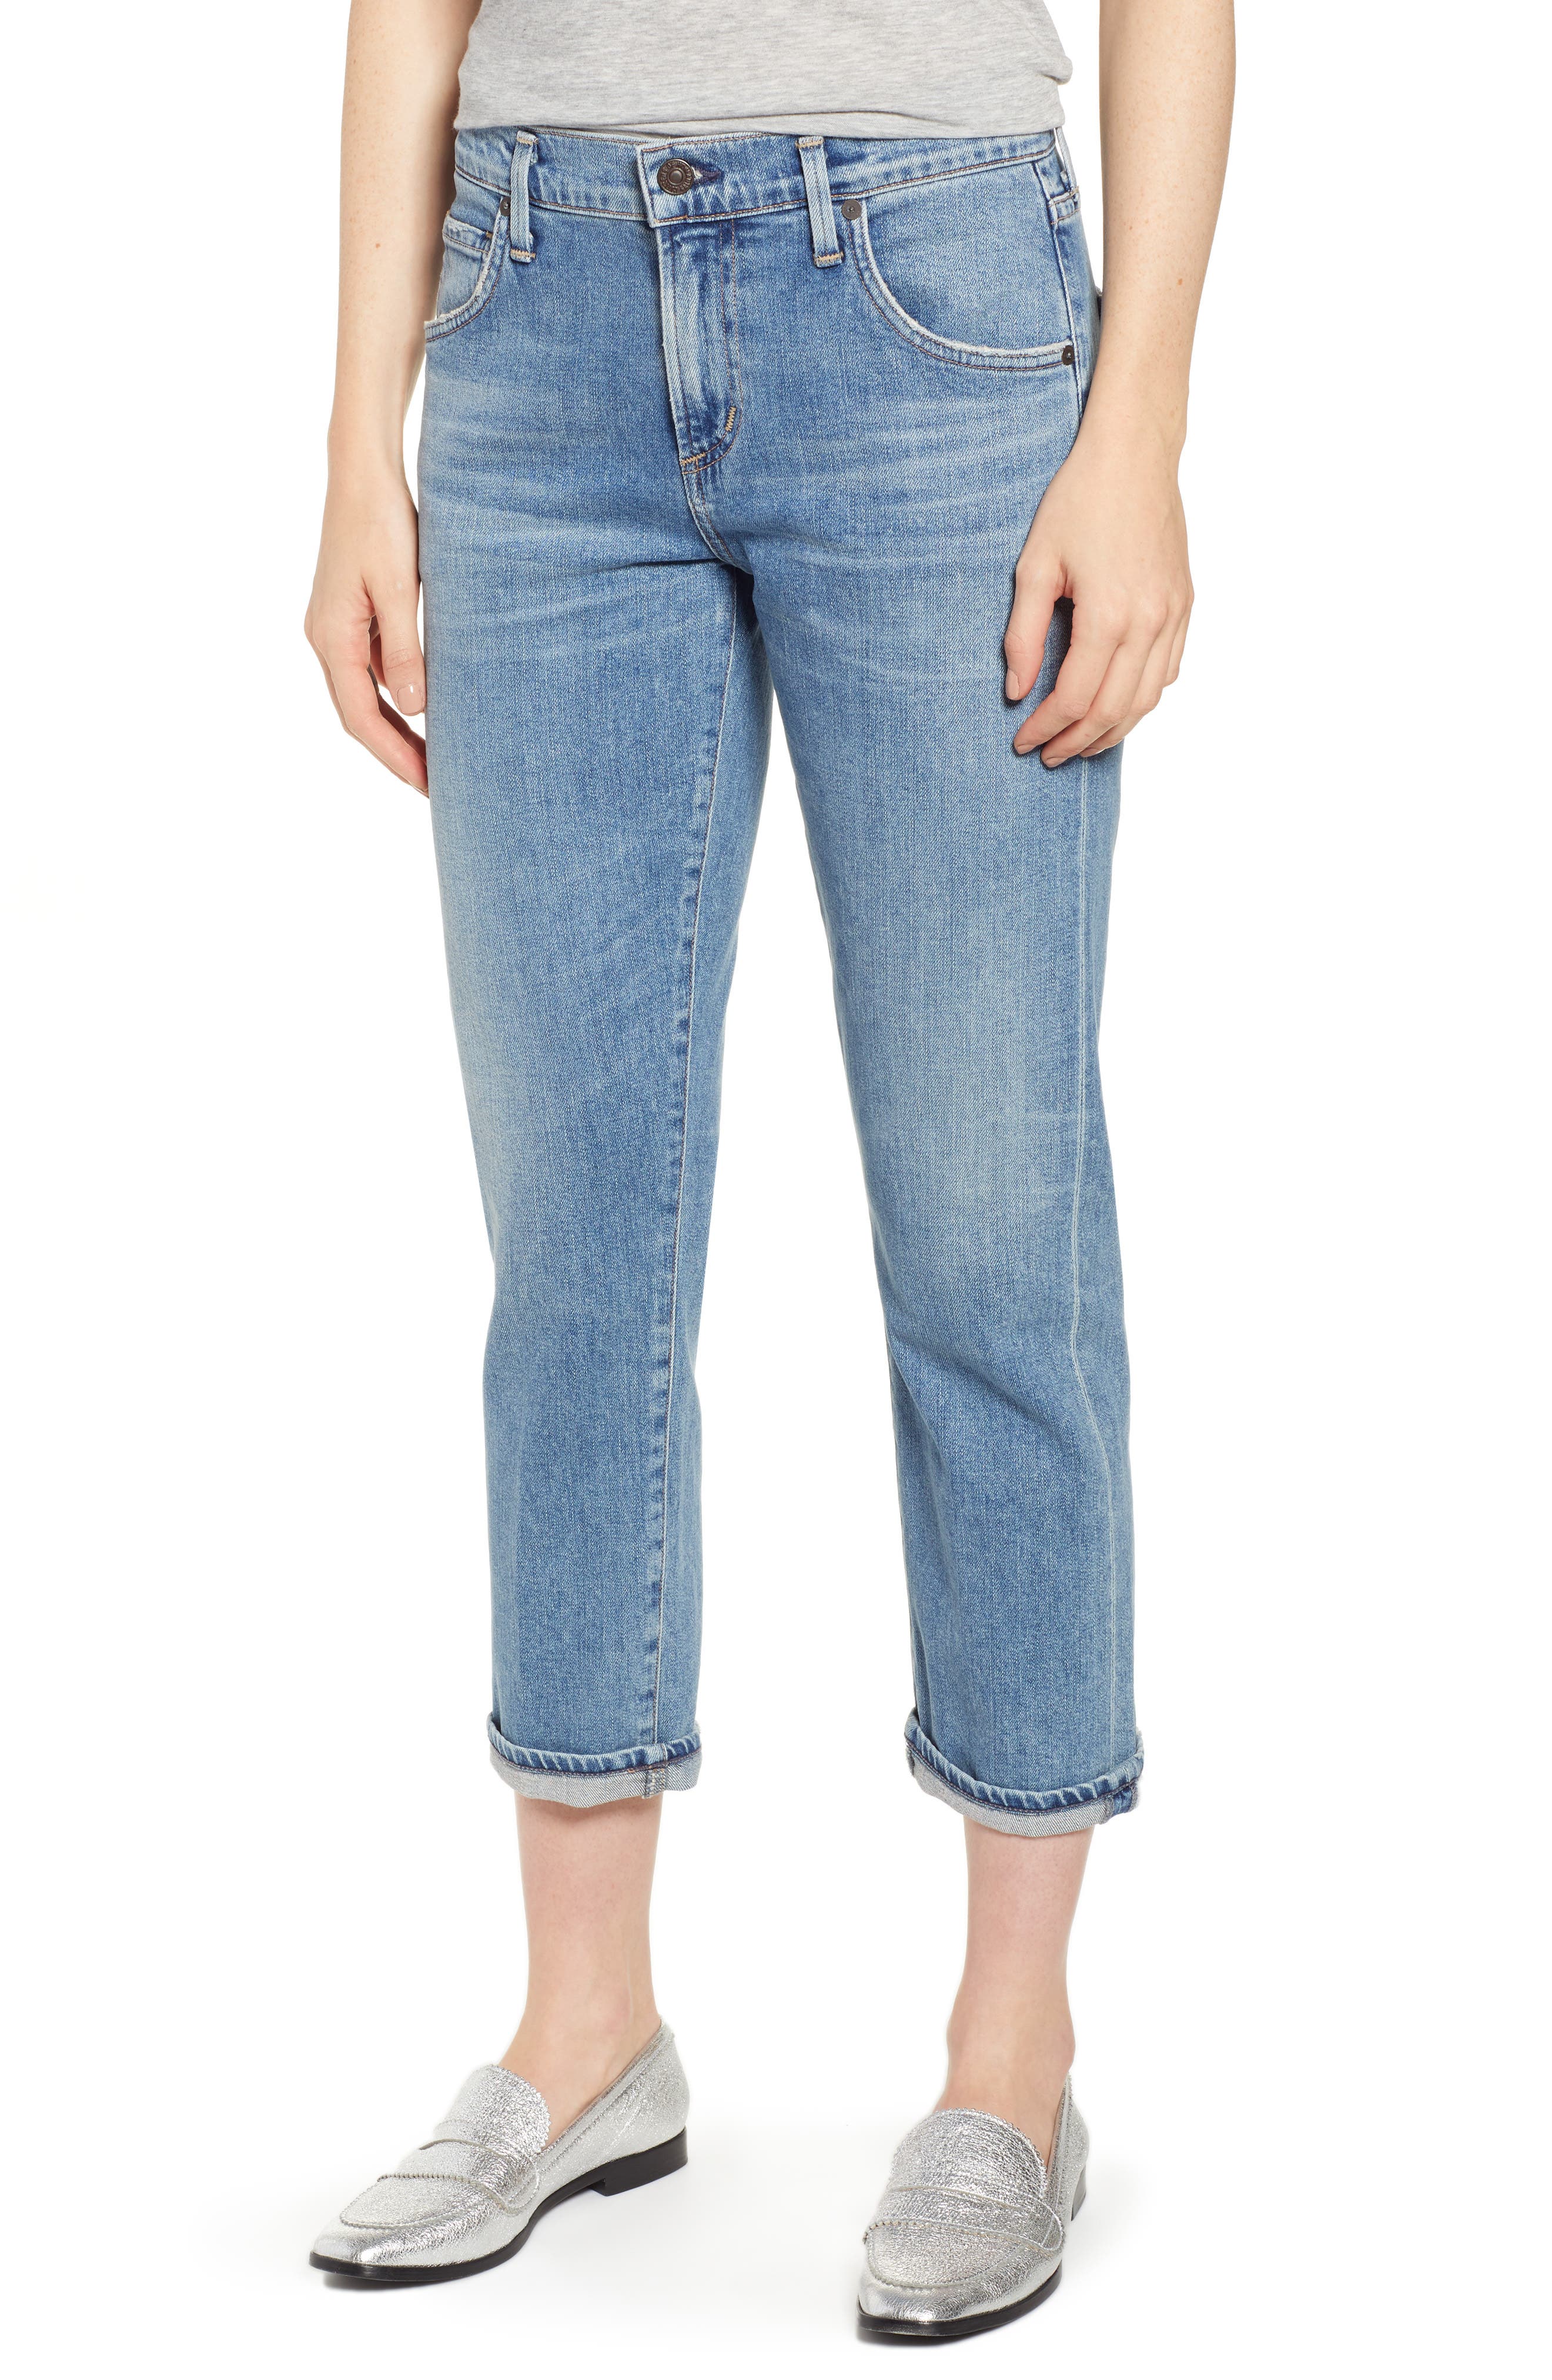 citizens of humanity emerson boyfriend ankle jeans